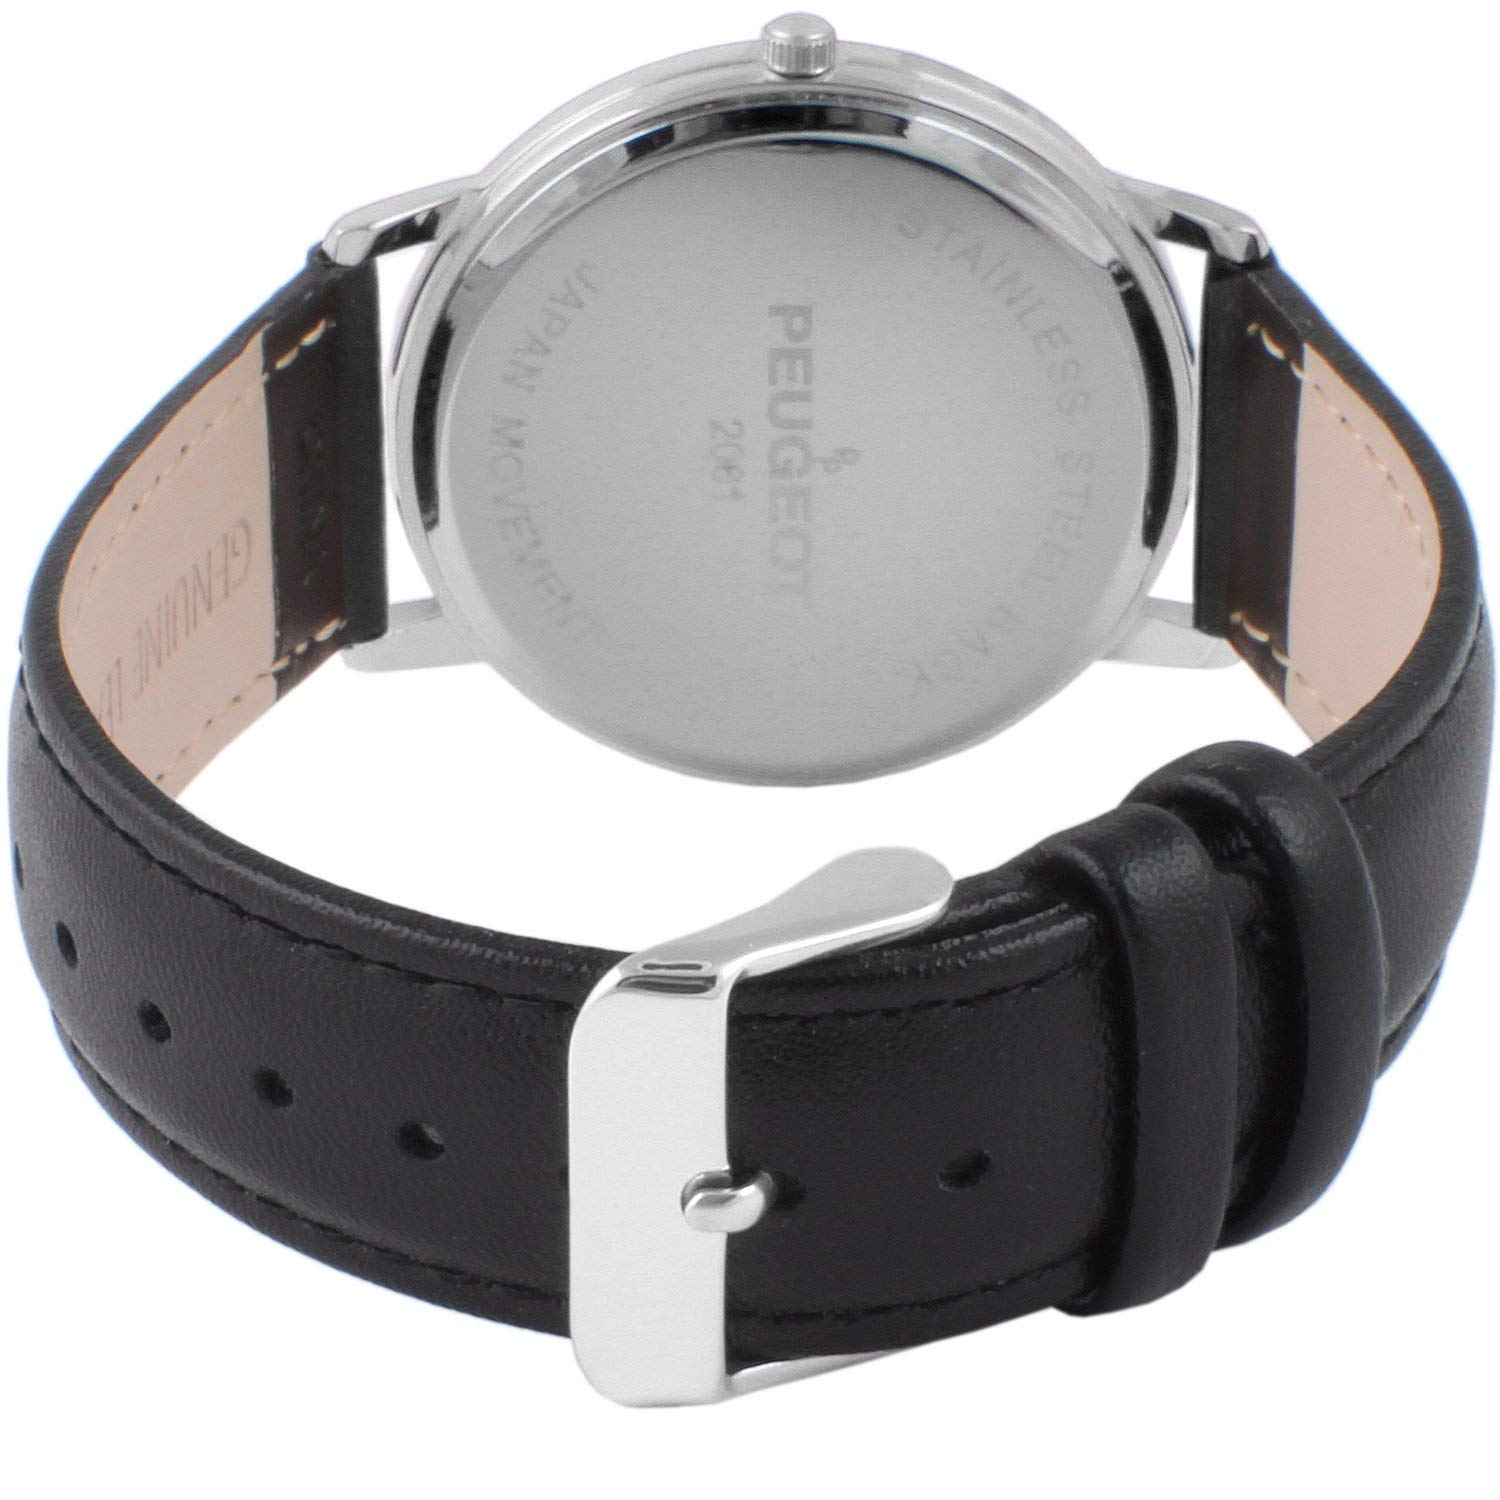 Peugeot Men's Vintage Business Watch - Retro Style, Analog Movement with Remote Sweep Second Hand and Black Leather Strap